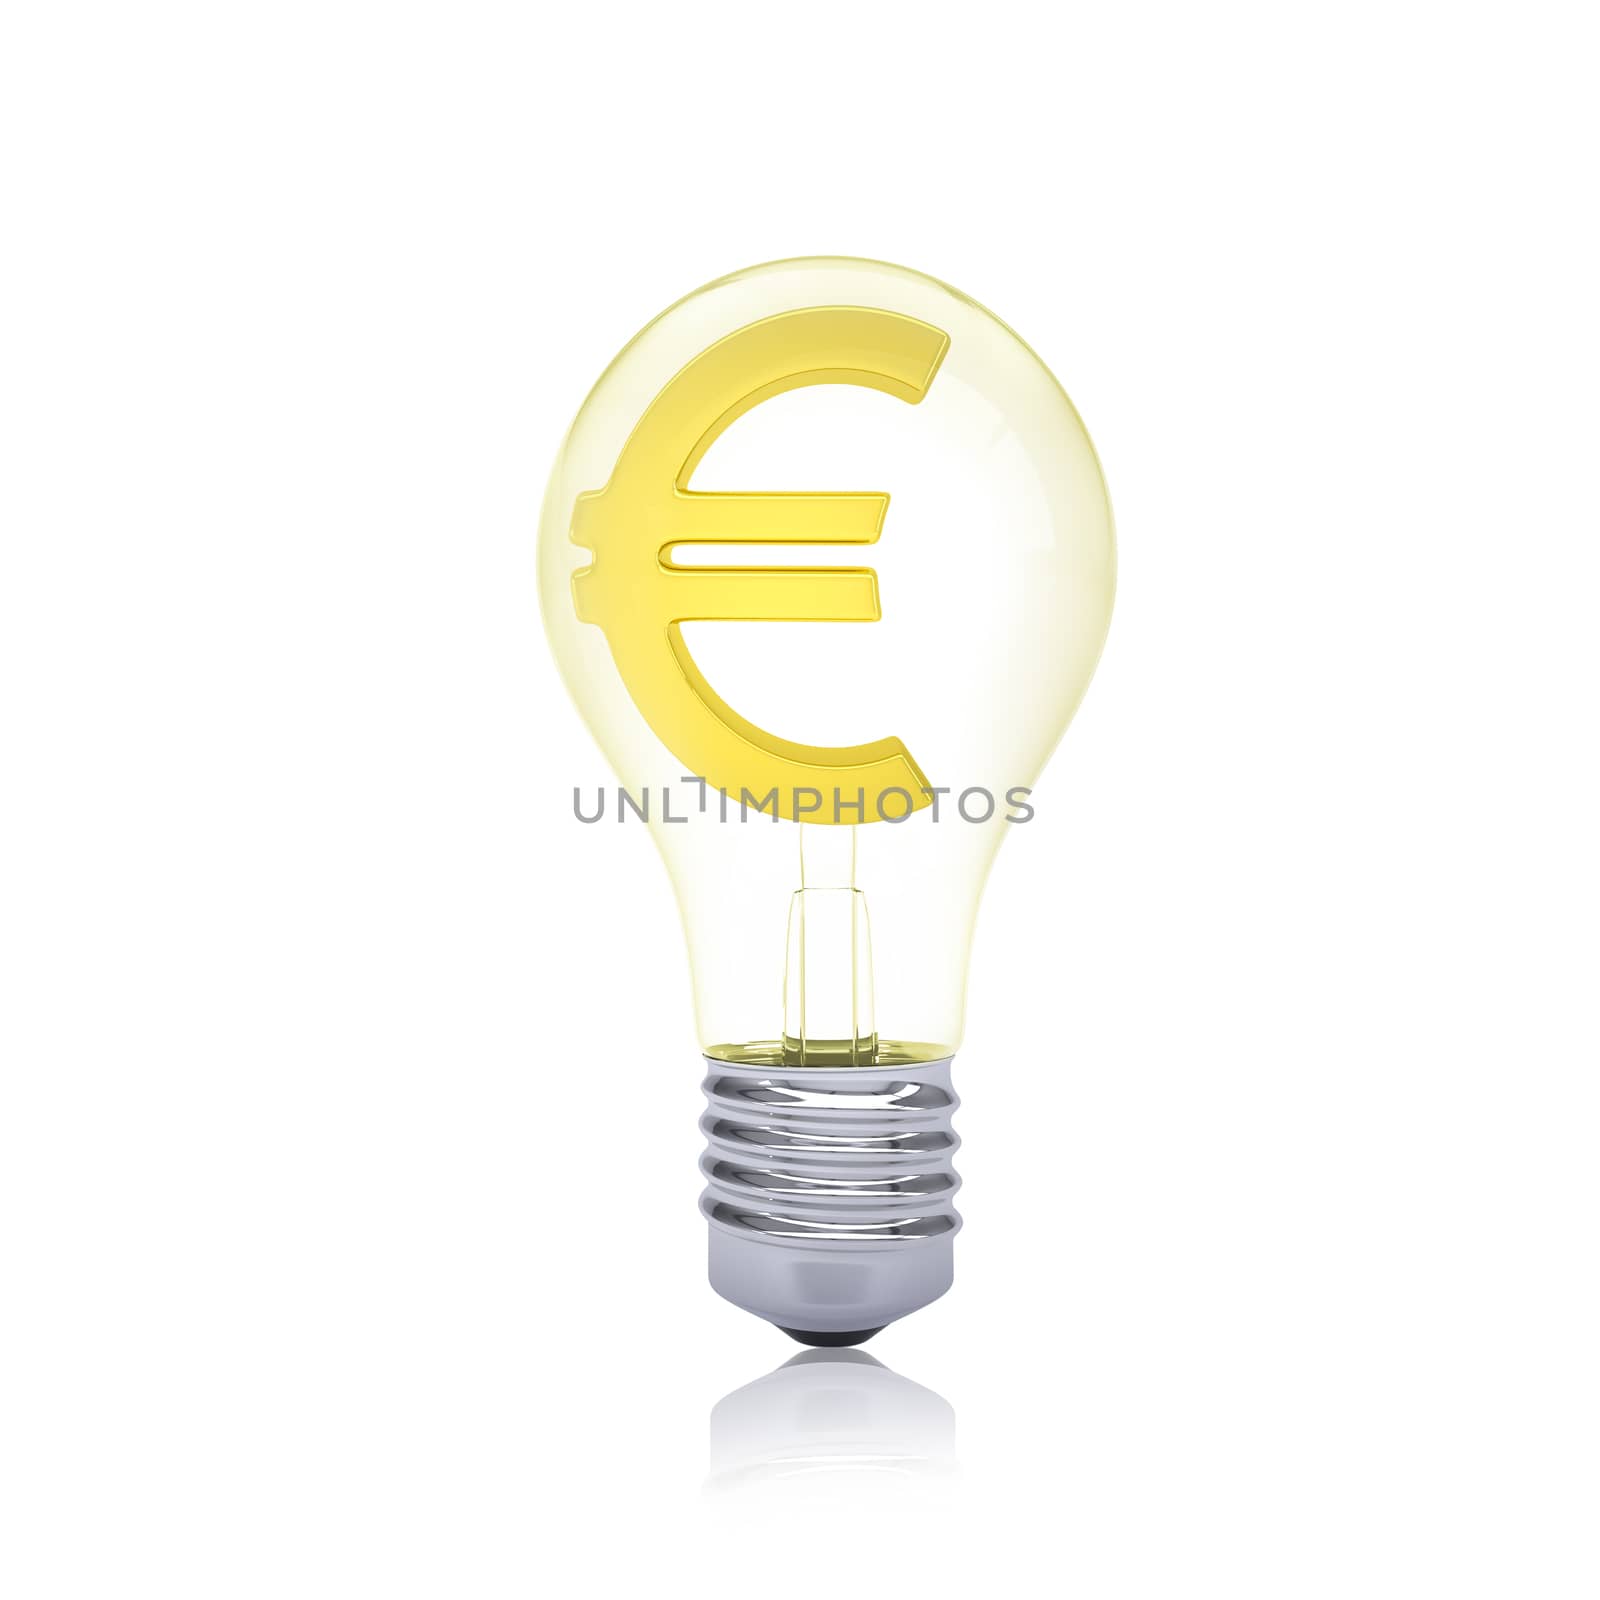 Gold euro sign inside the bulb. Business concept